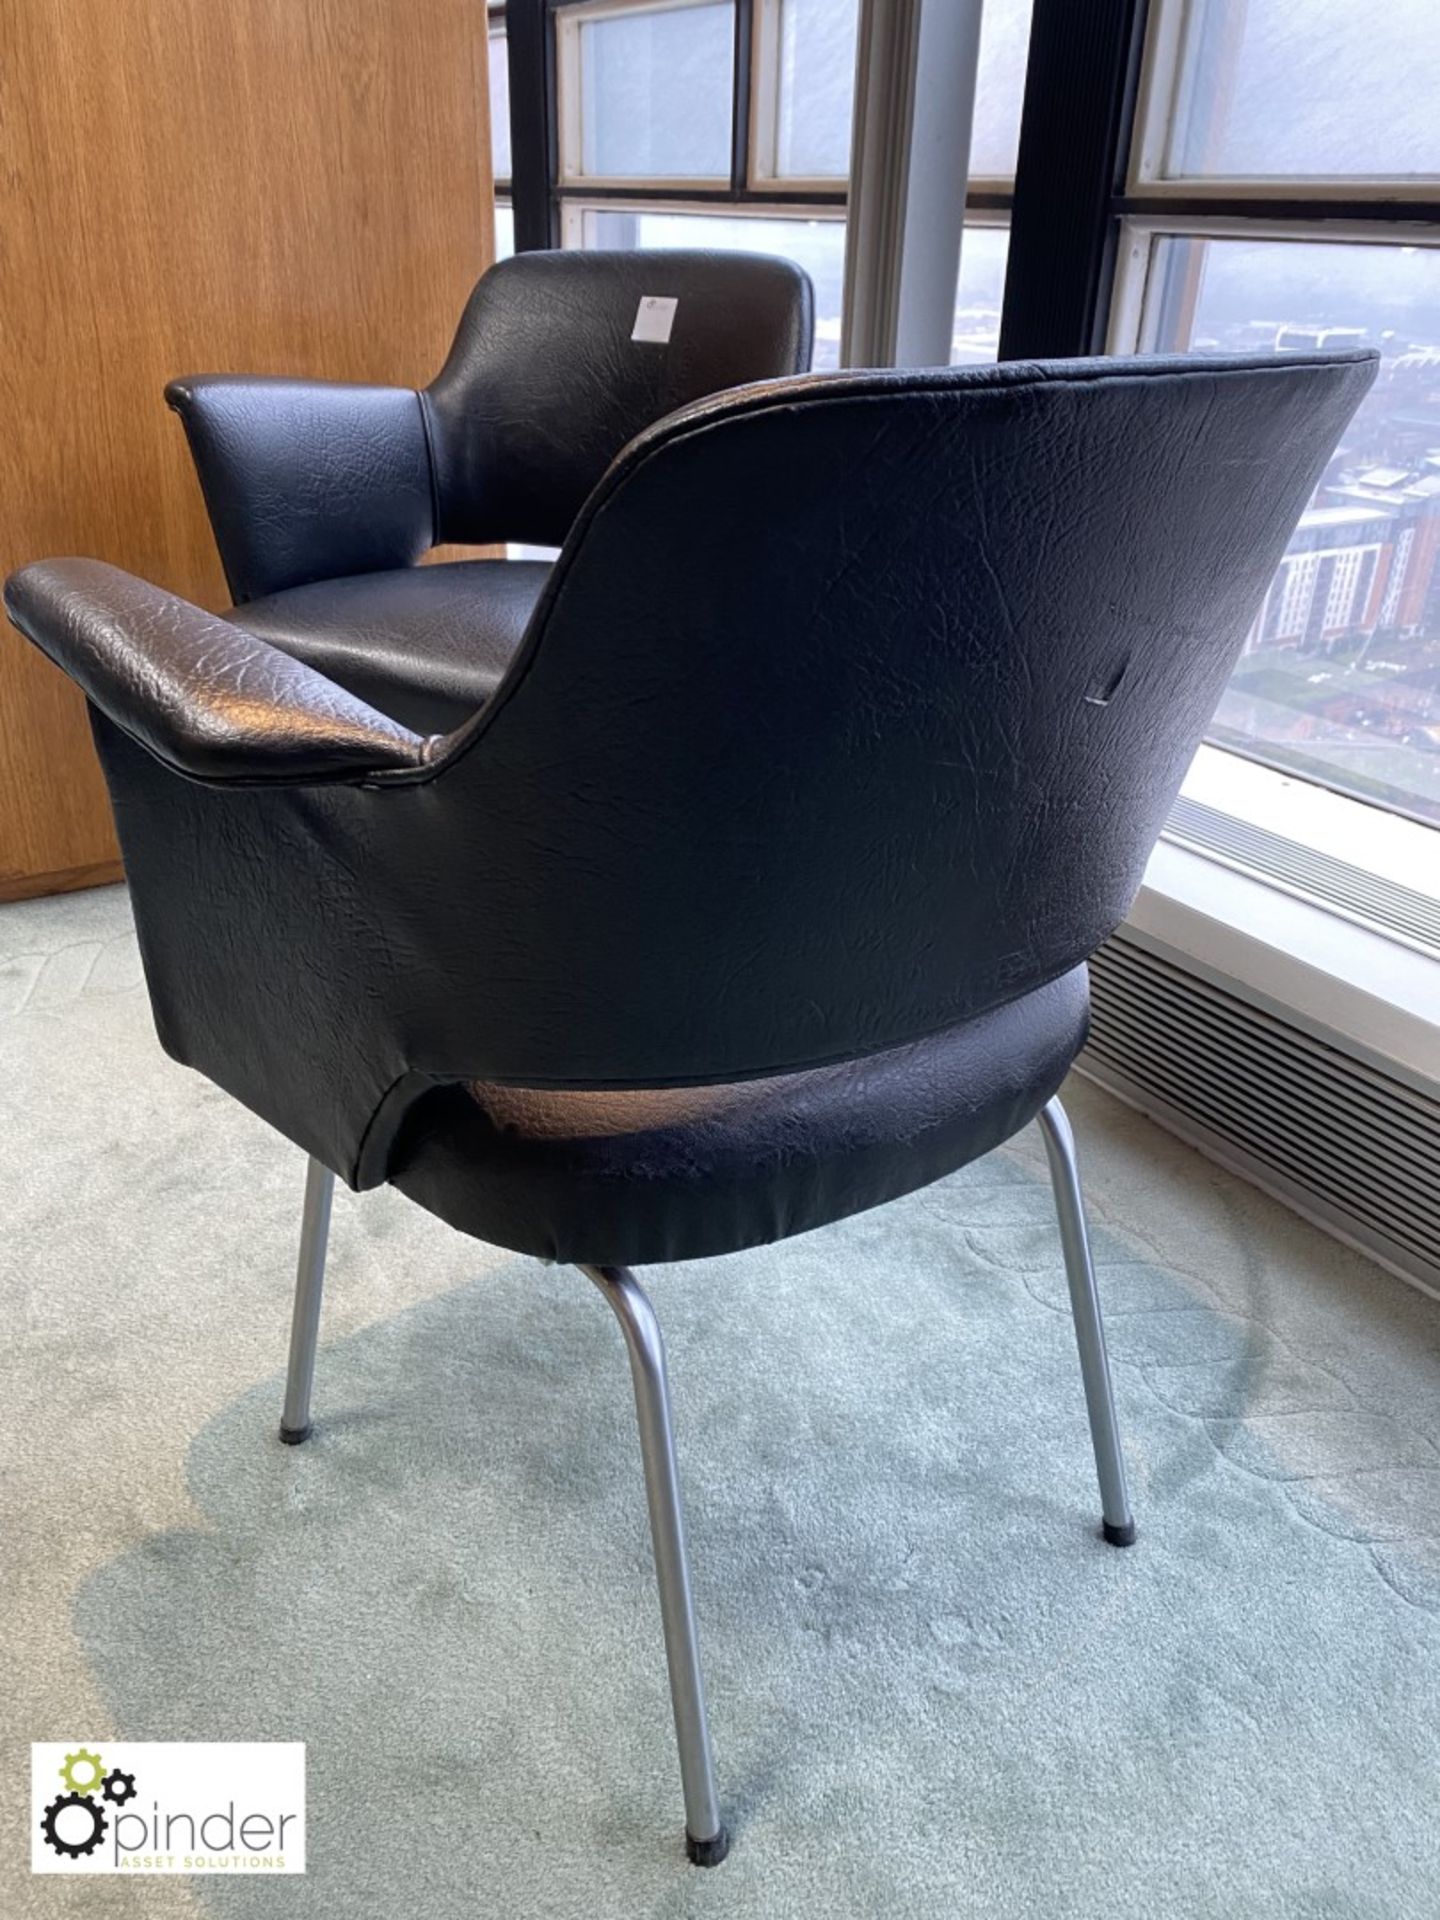 Set 2 leather upholstered retro Meeting Tub Chairs (located in Meeting Room 13 on 23rd Floor) - Image 3 of 3